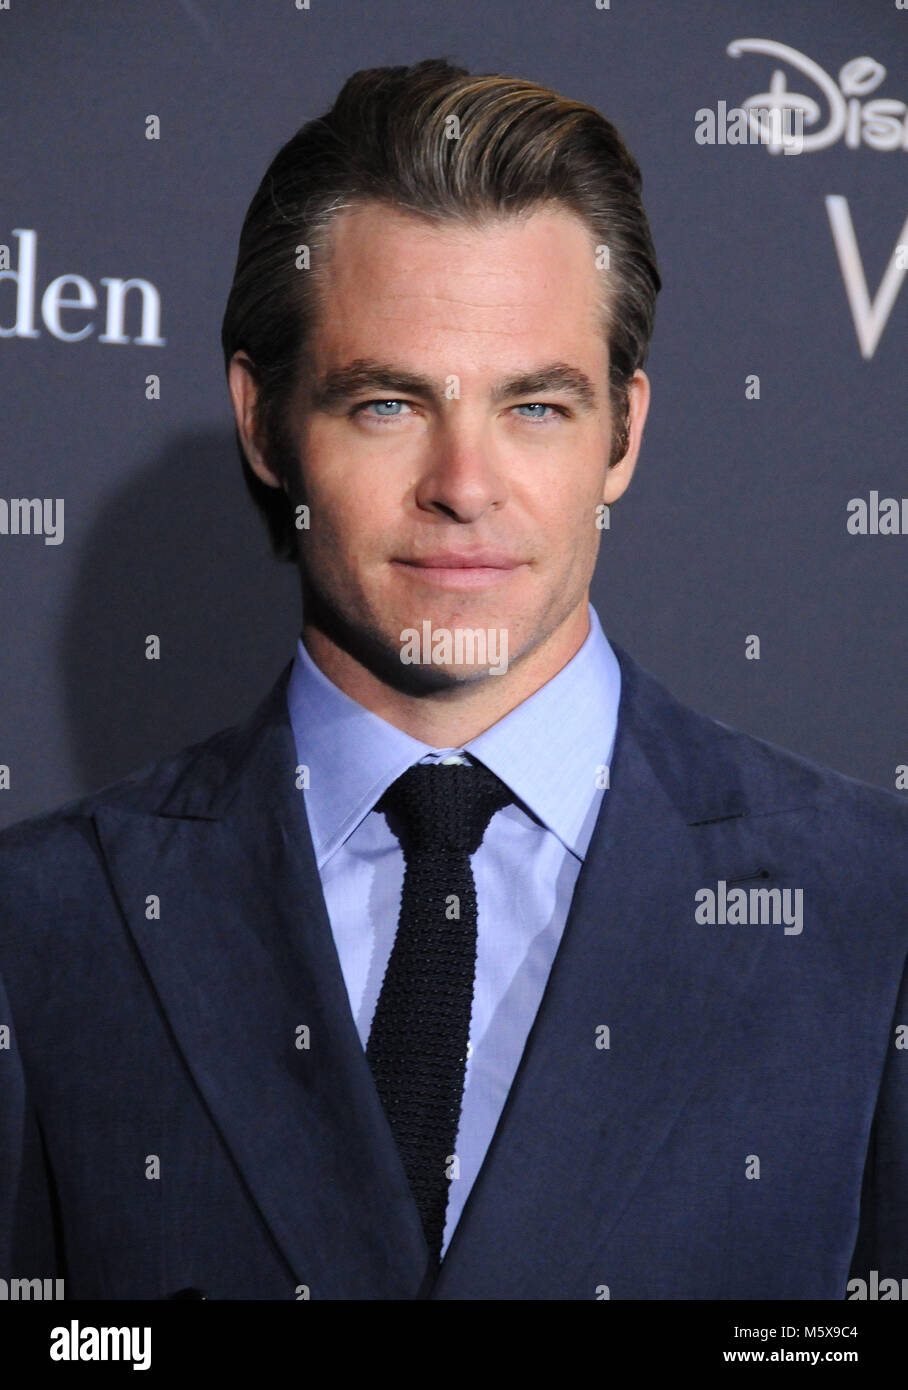 Los Angeles, USA. 26th Feb, 2018. Actor Chris Pine attends the World Premiere of Disney's' 'A Wrinkle In Time' at the El Capitan Theatre on February 26, 2018 in Los Angeles, California. Photo by Barry King/Alamy Live News Stock Photo